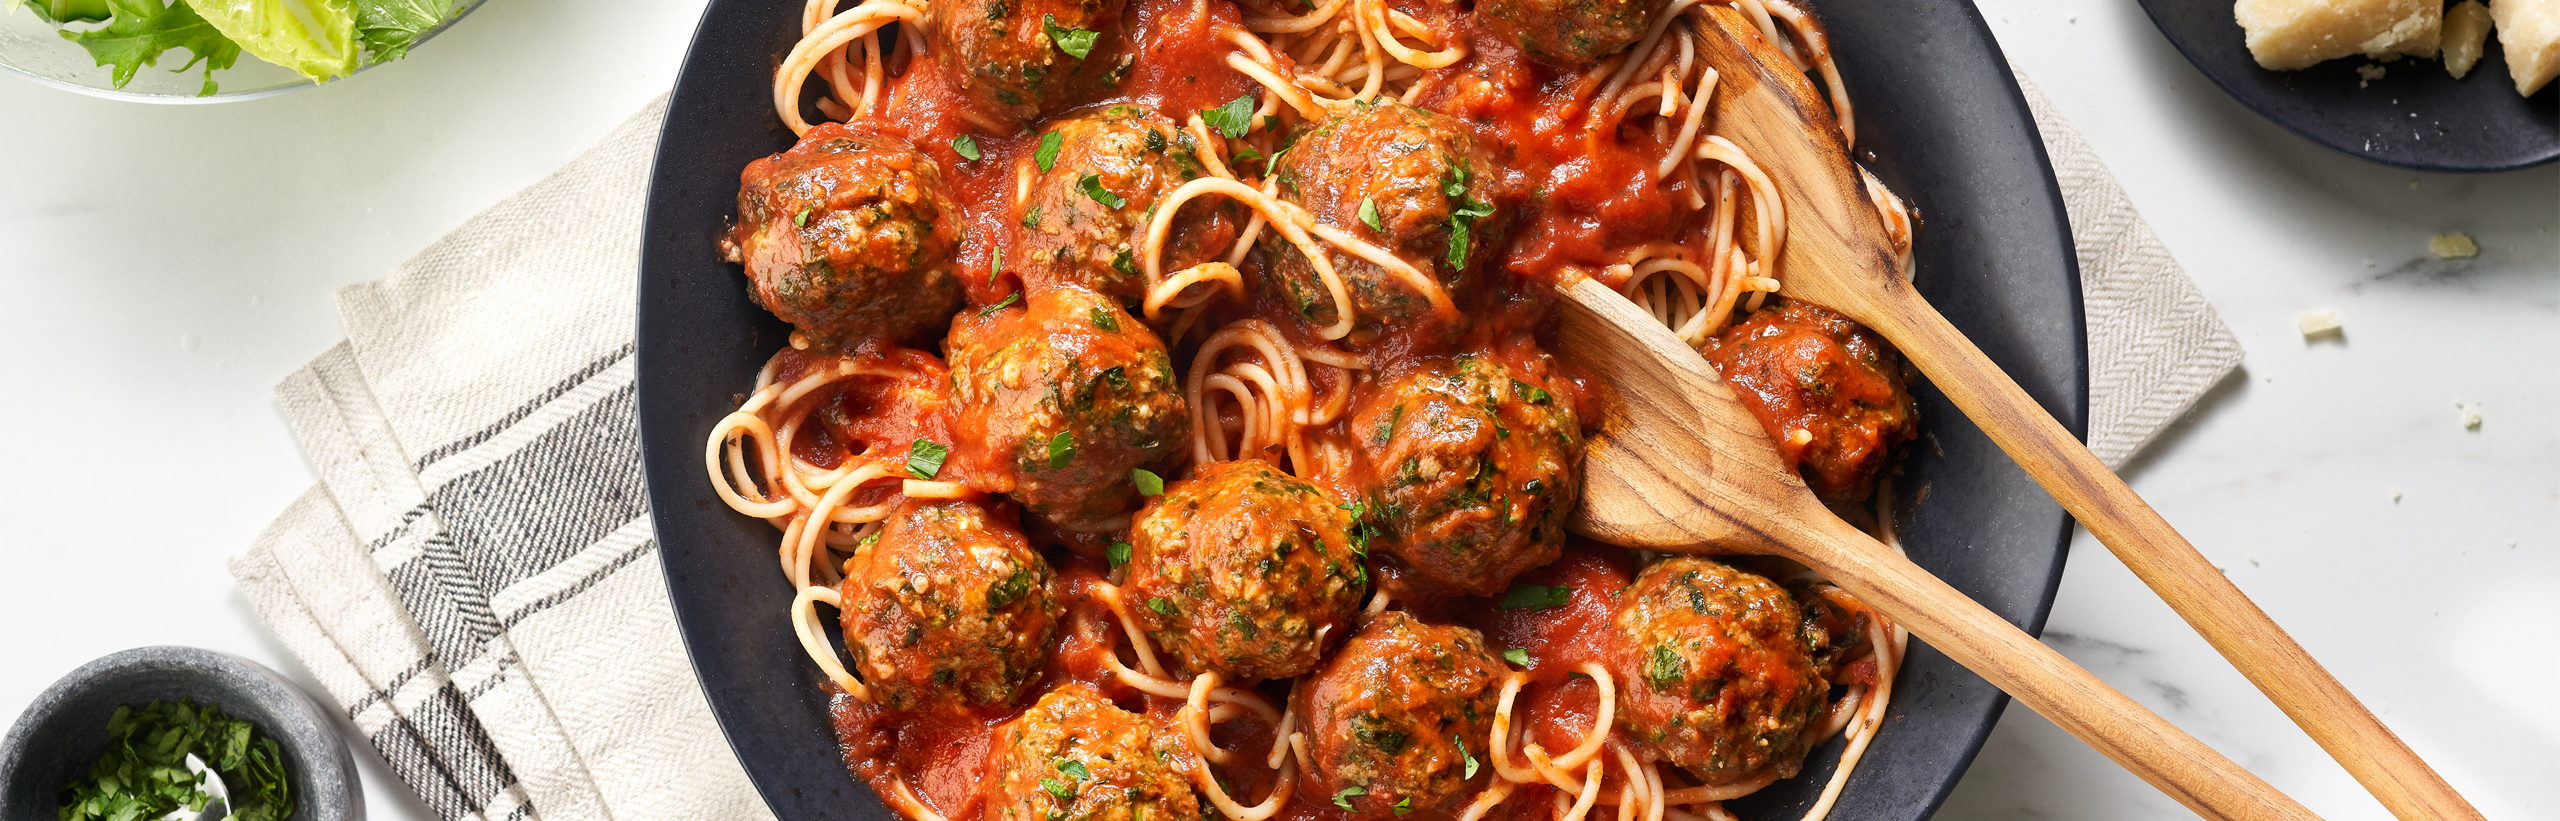 how to make spaghetti and meatballs with prego